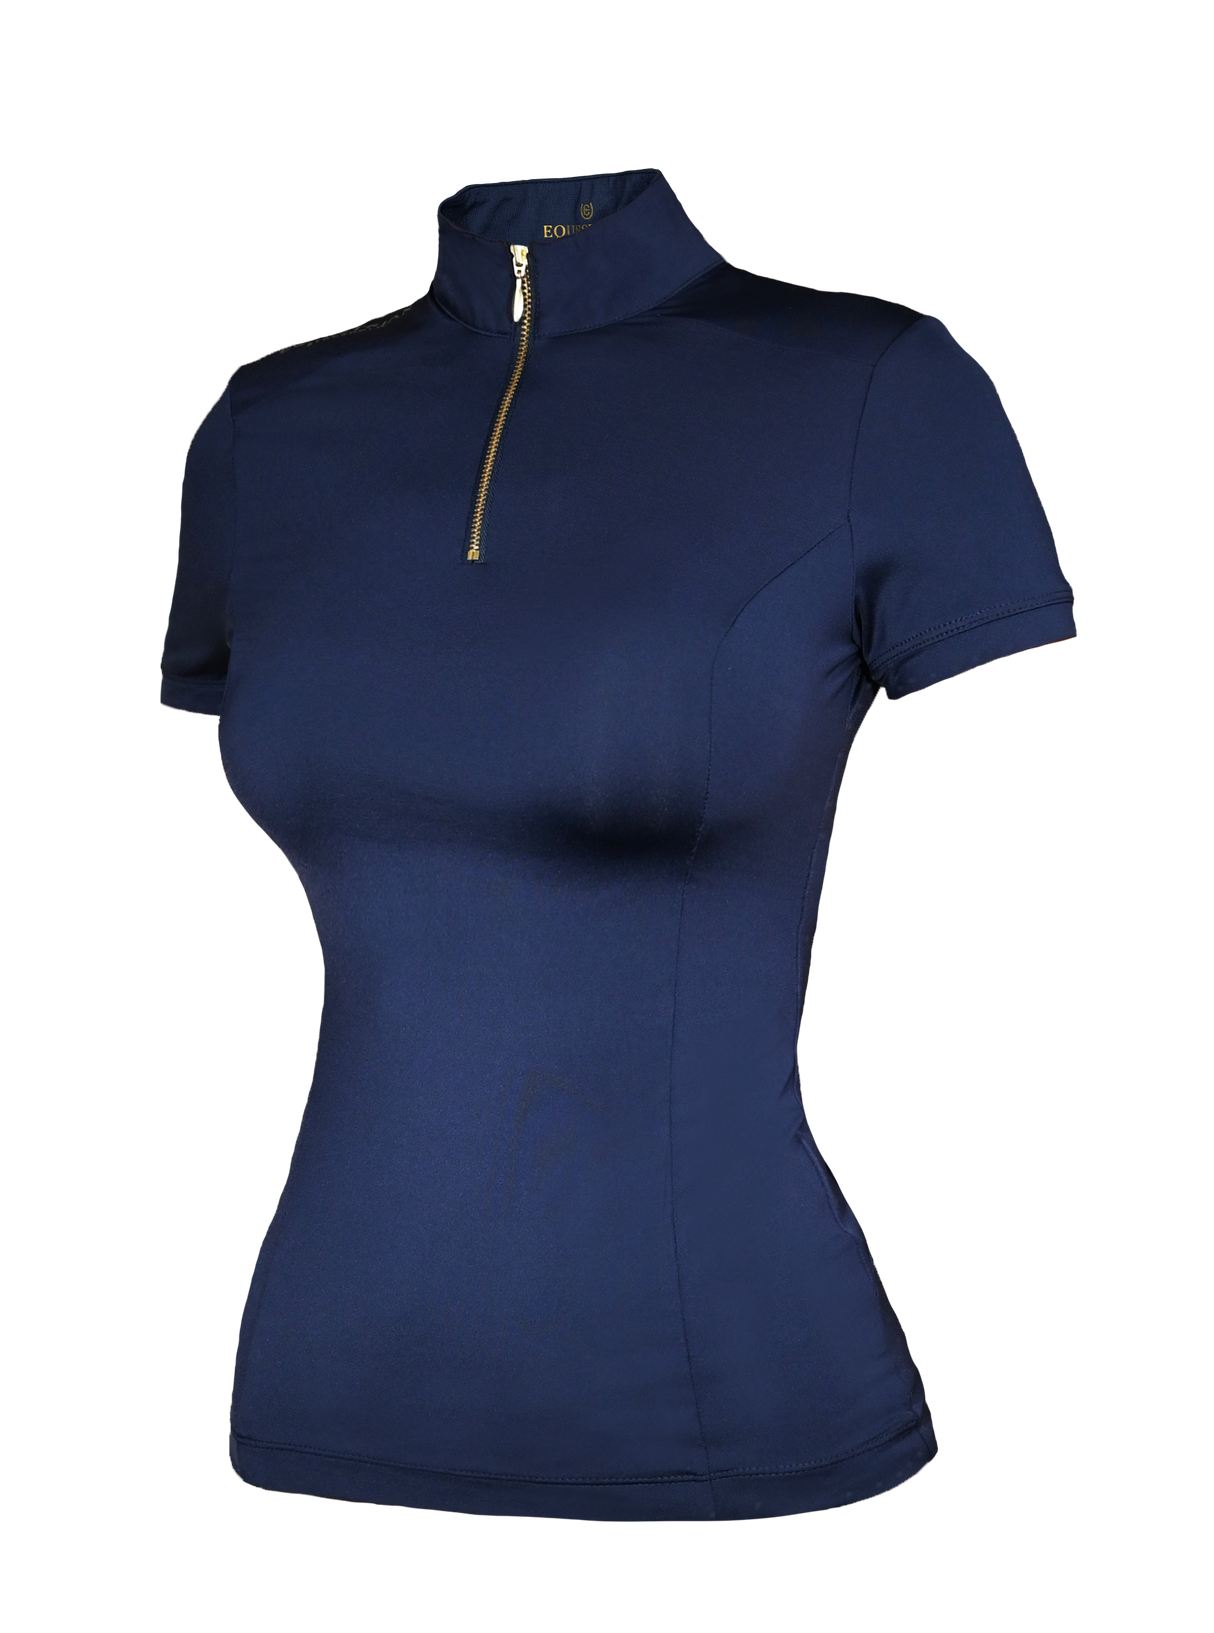 Equestrian Stockholm UV Protection Short-Sleeve Base Layer Royal Classic